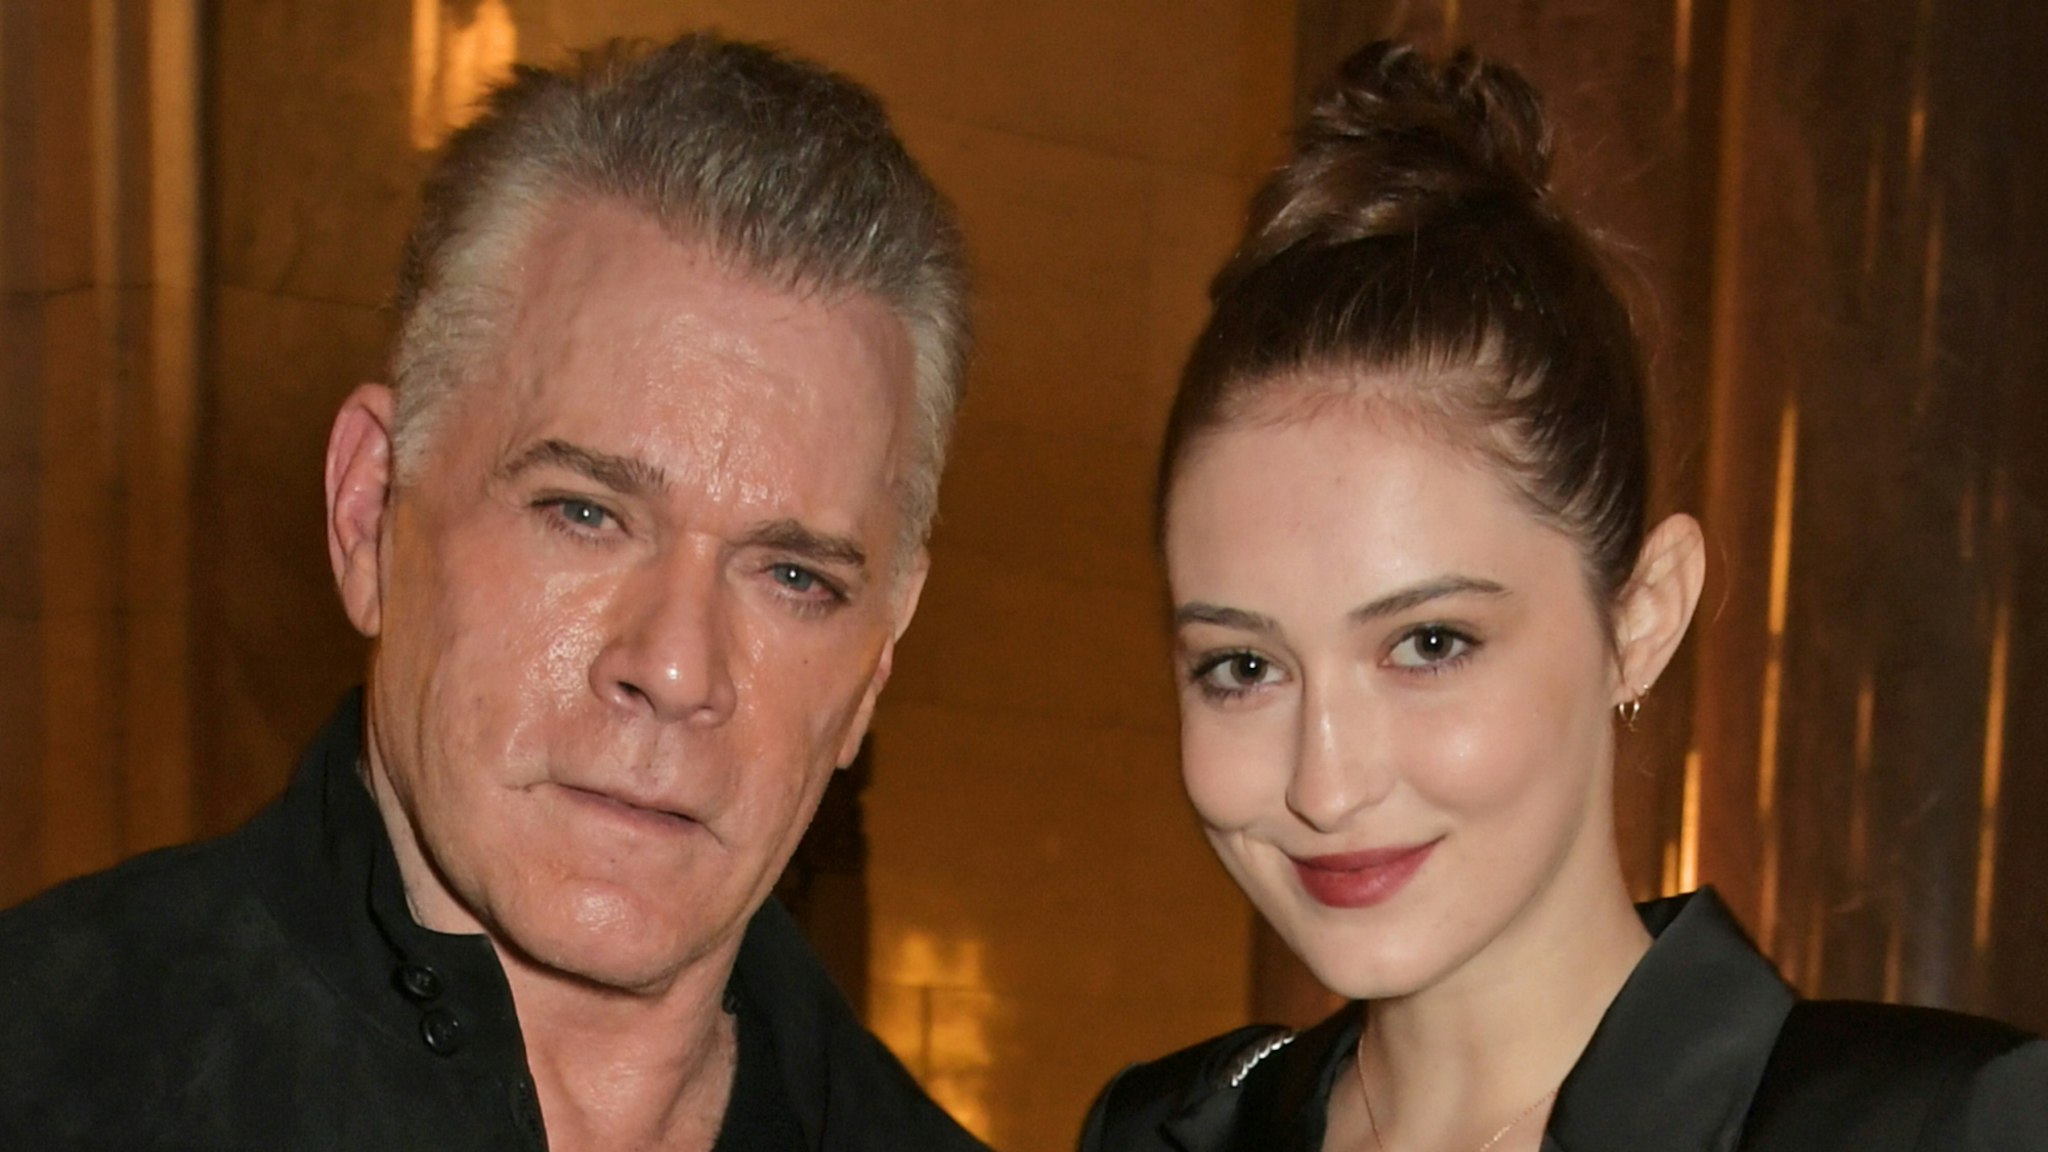 Ray Liotta and Karsen Liotta attend The Academy Of Motion Pictures Arts And Sciences 2019 New Members Party during the 63rd BFI London Film Festival at The Freemasons Hall on October 5, 2019 in London, England.